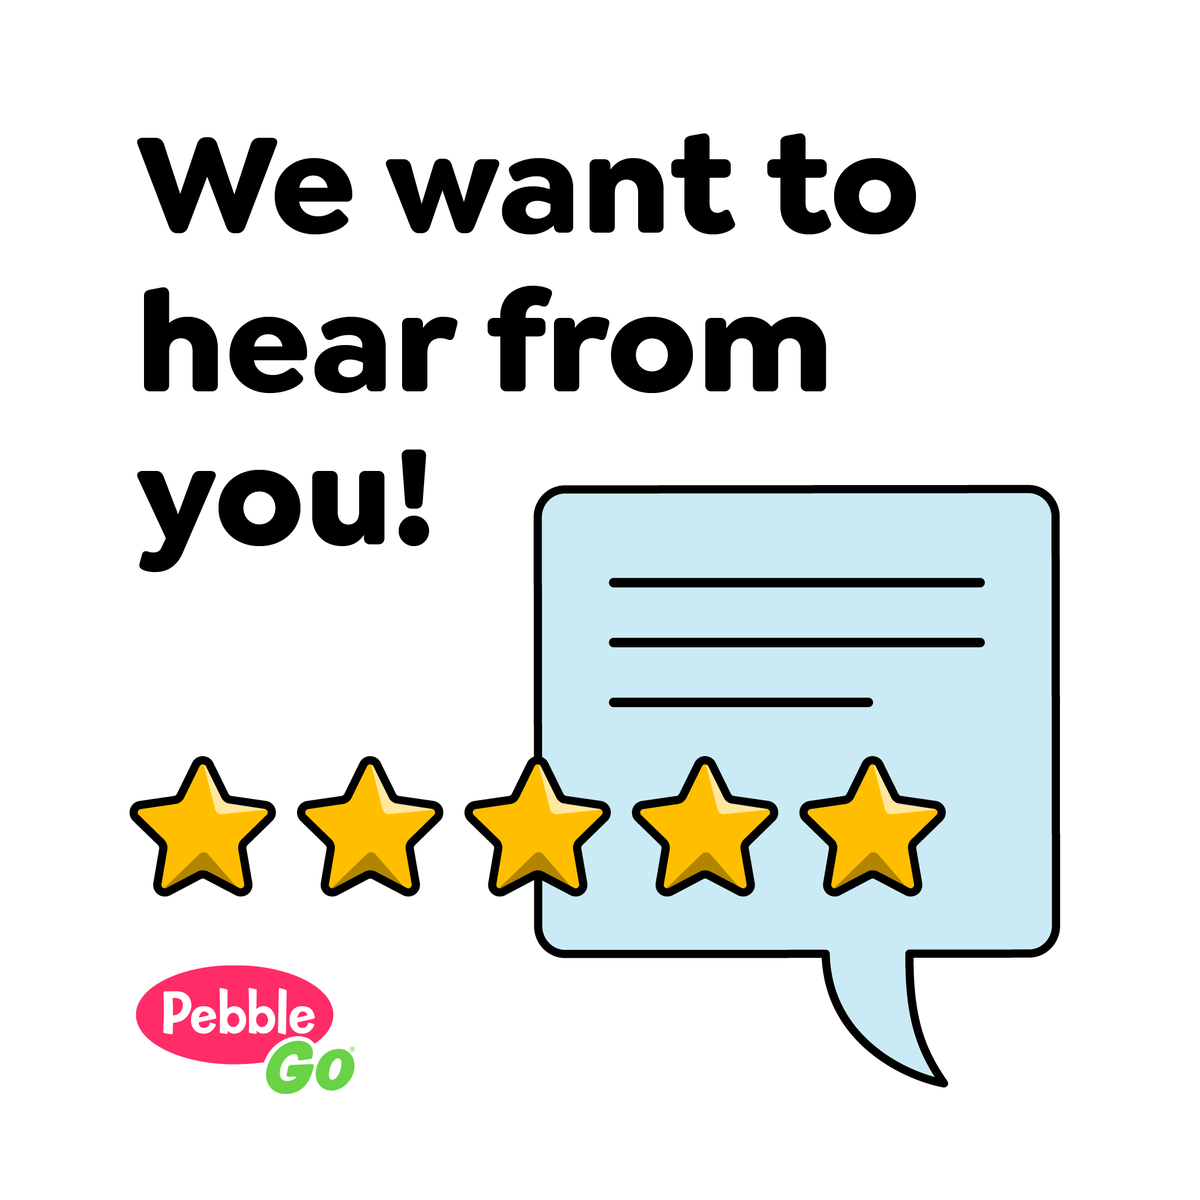 Capstone is working to better understand the successful work of educators like yourself in schools across the country. As someone using PebbleGo & PebbleGo Next, we want to learn from you—about your experiences, successes, and recommendations. ⭐ ➡️ bit.ly/3JqIAsx